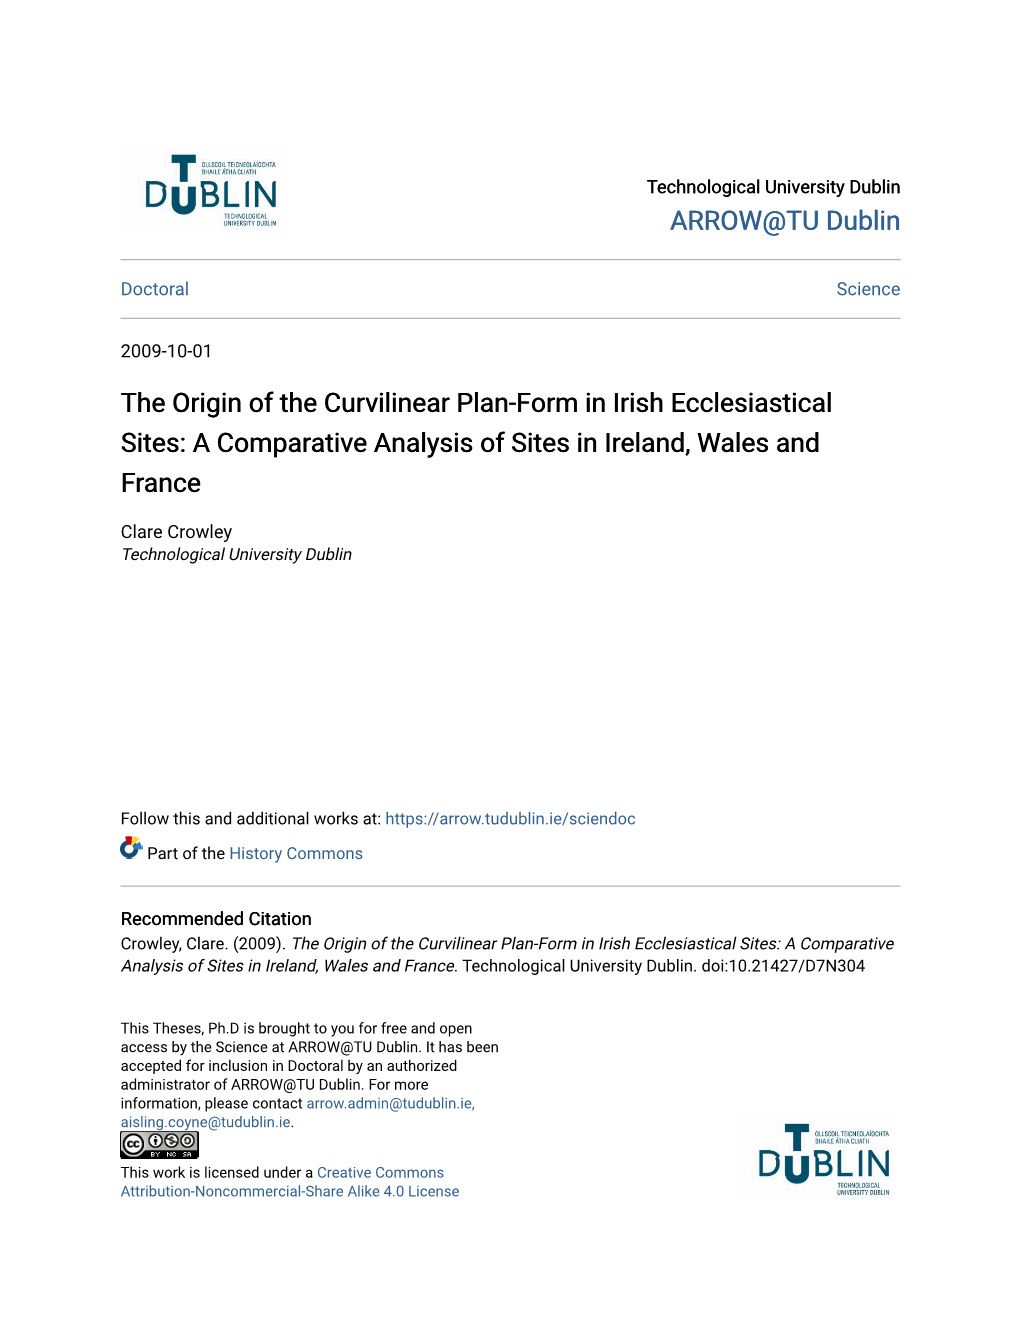 The Origin of the Curvilinear Plan-Form in Irish Ecclesiastical Sites: a Comparative Analysis of Sites in Ireland, Wales and France